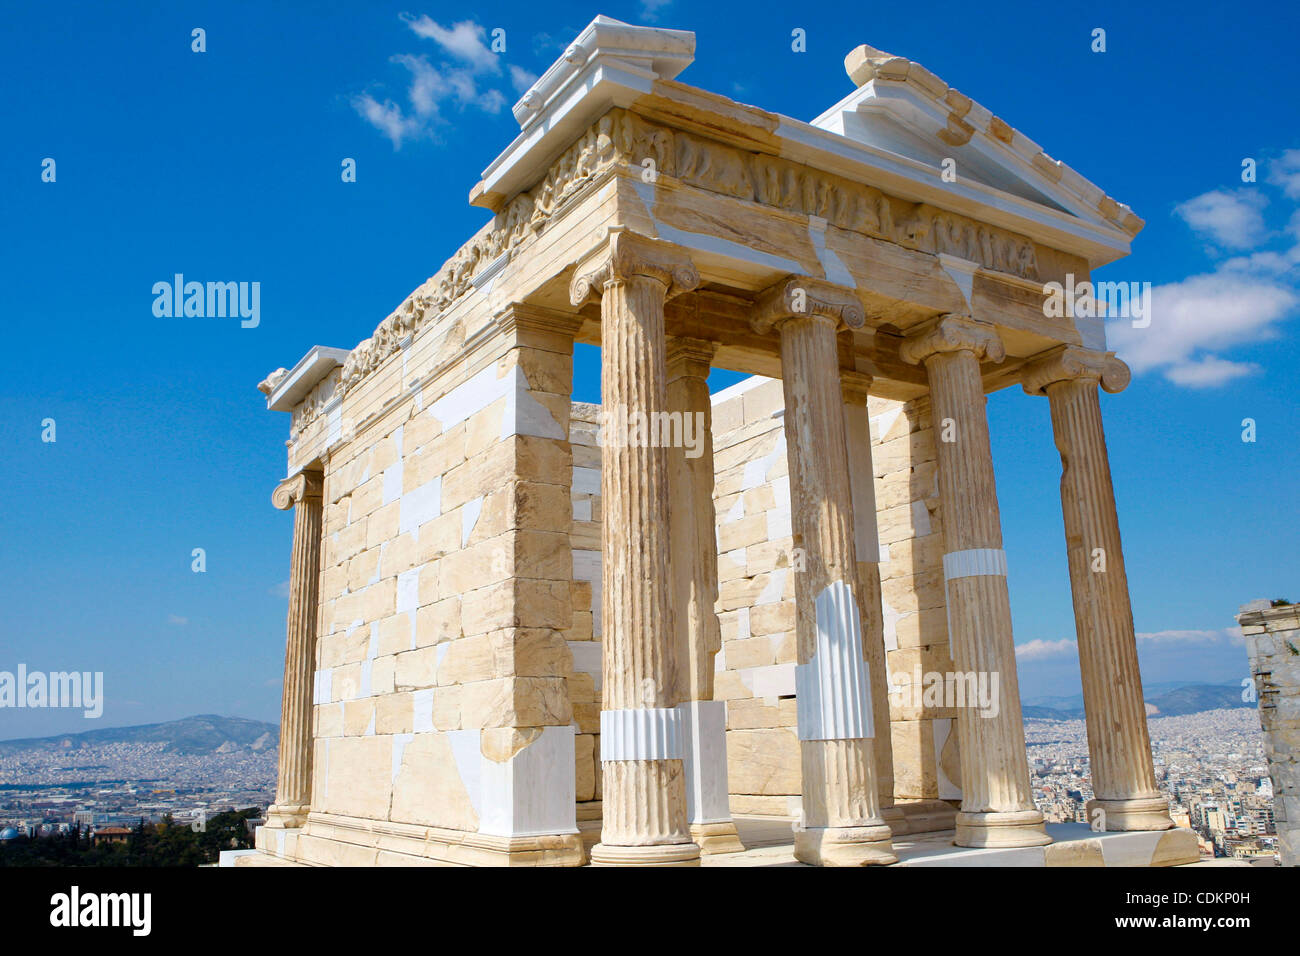 Mar. 23, 2011 - Athens, Greece - Restored of the Athena Nike(Apteros Nike) or Athena Victory. An extensive, internationally acclaimed conservation and restoration has been taking place on